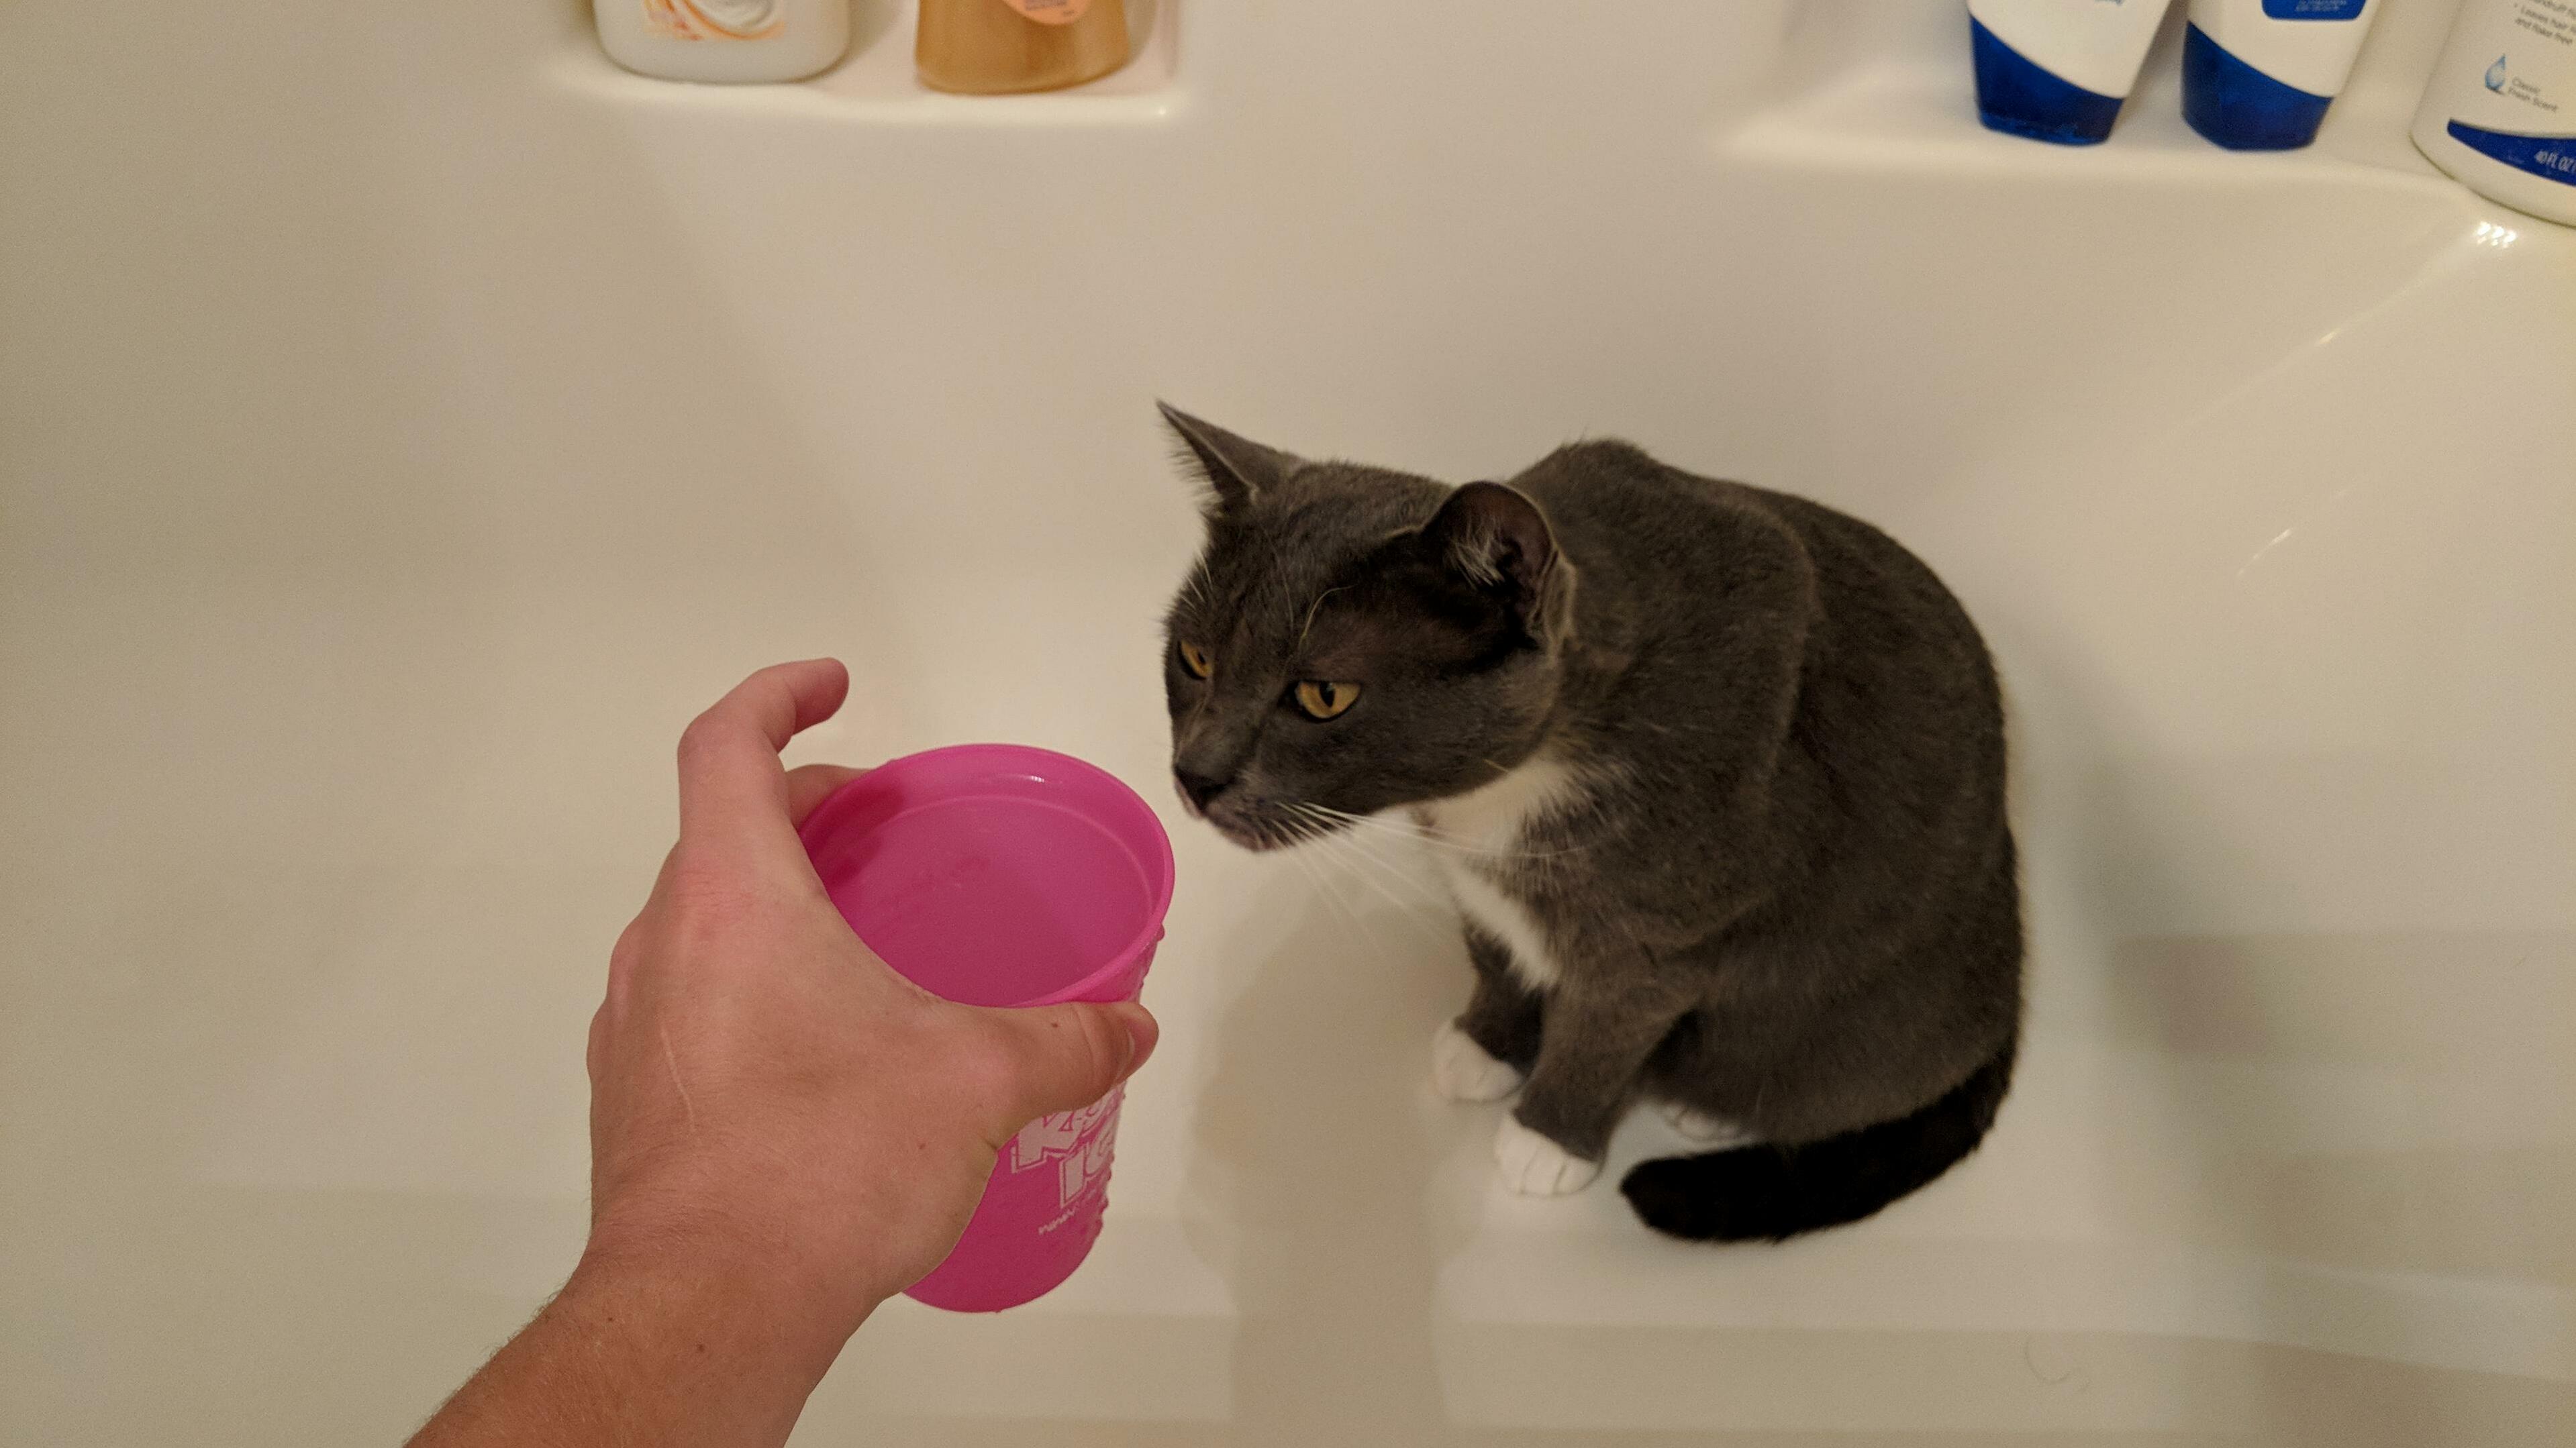 My cat found a cup of water in the bathtub once. now she demands in on the daily.